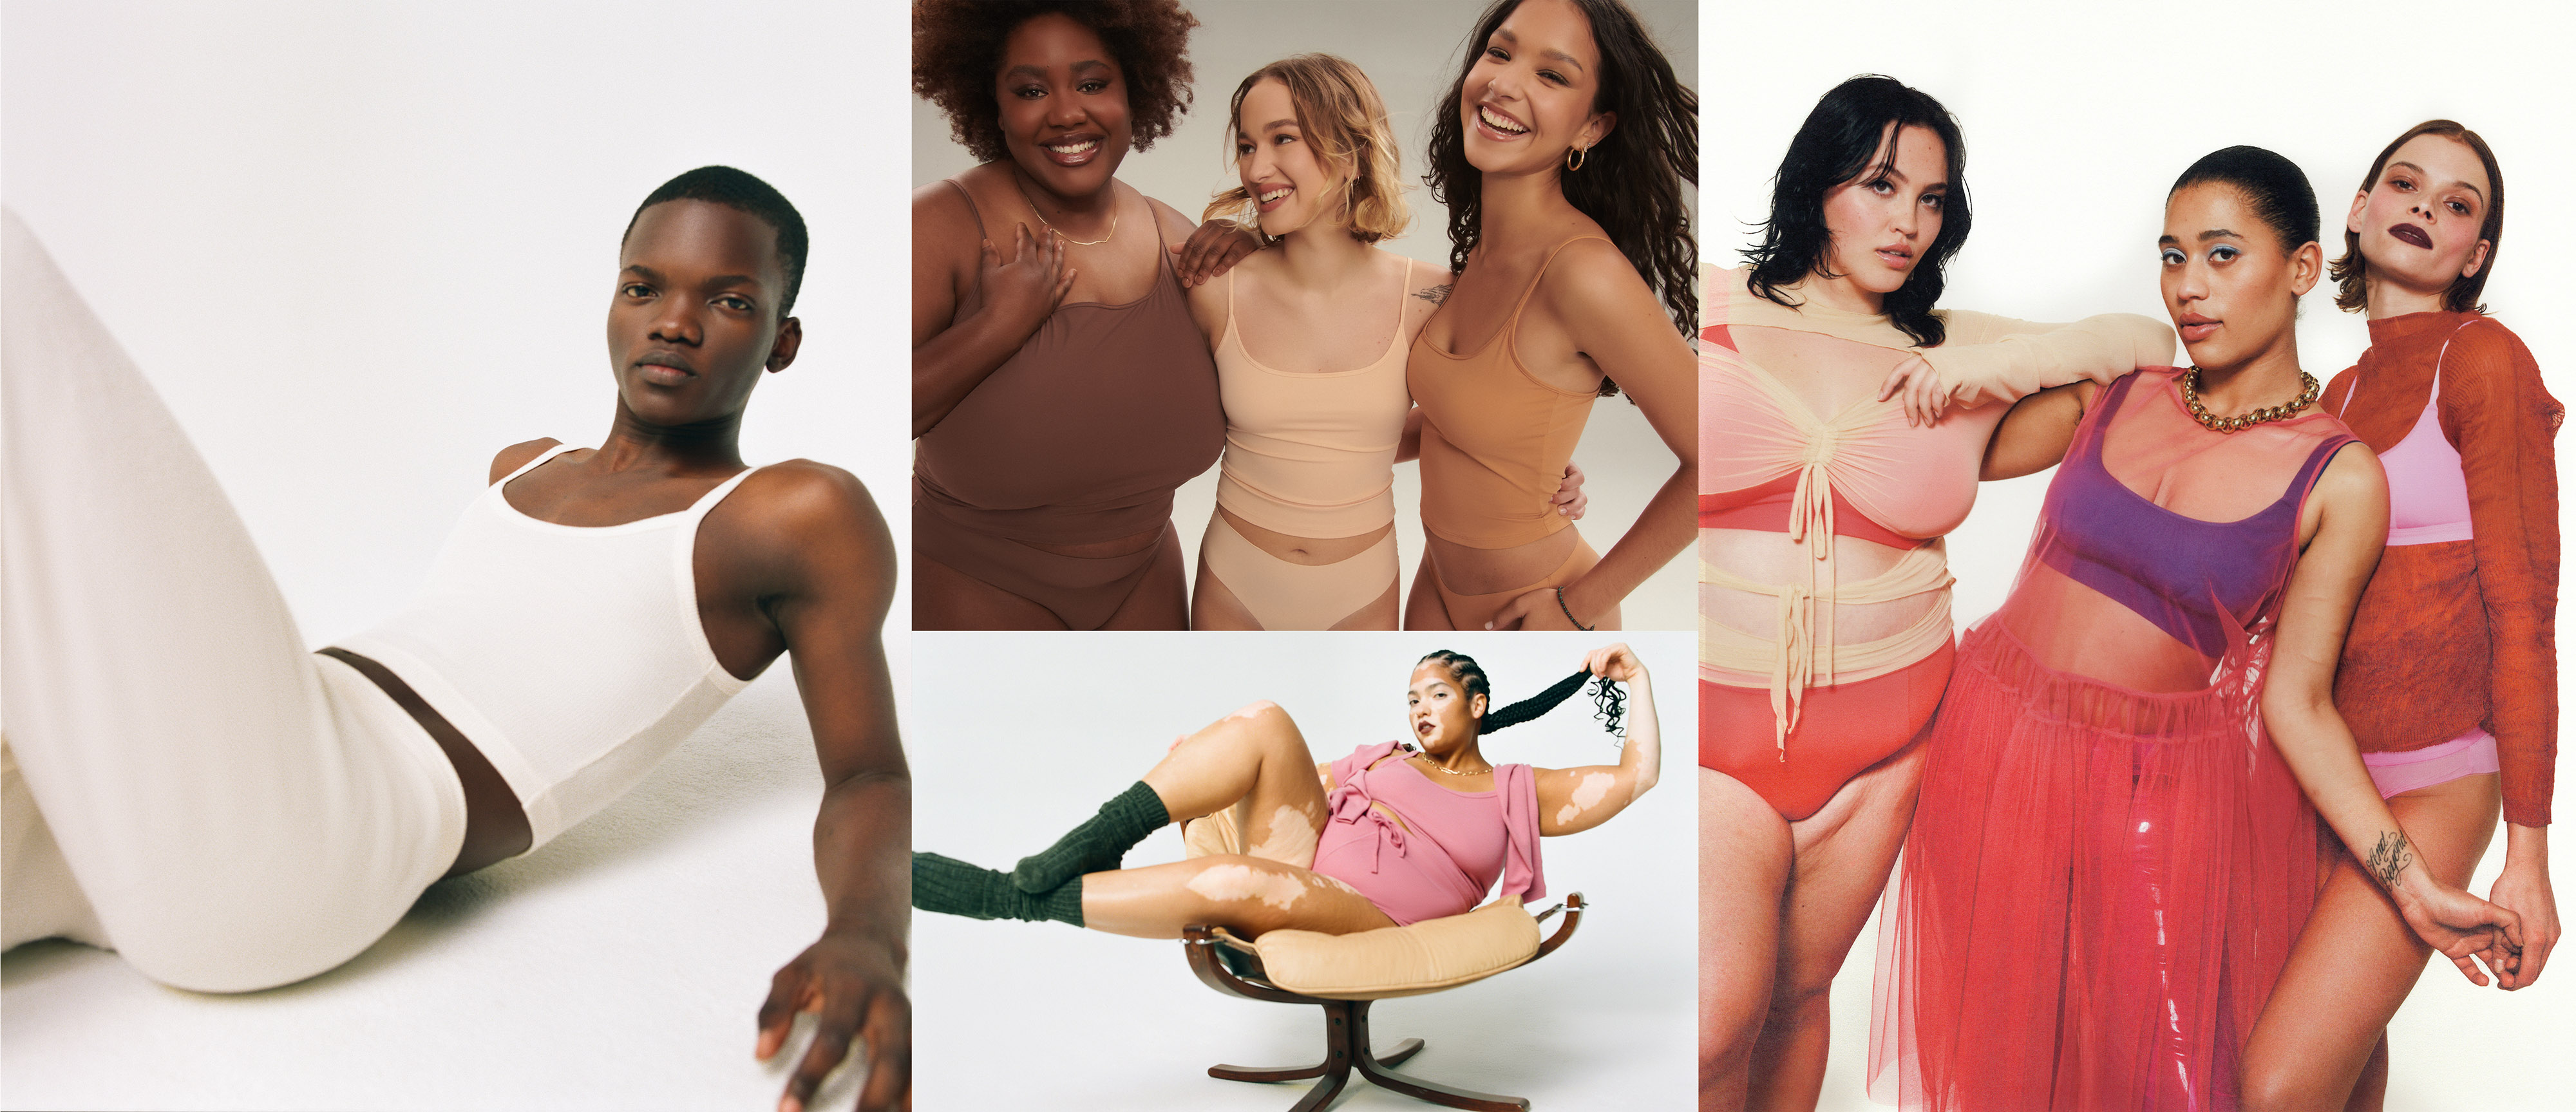 Gen Z underwear start-up Parade snapped up by Fruit of the Loom  license-holder